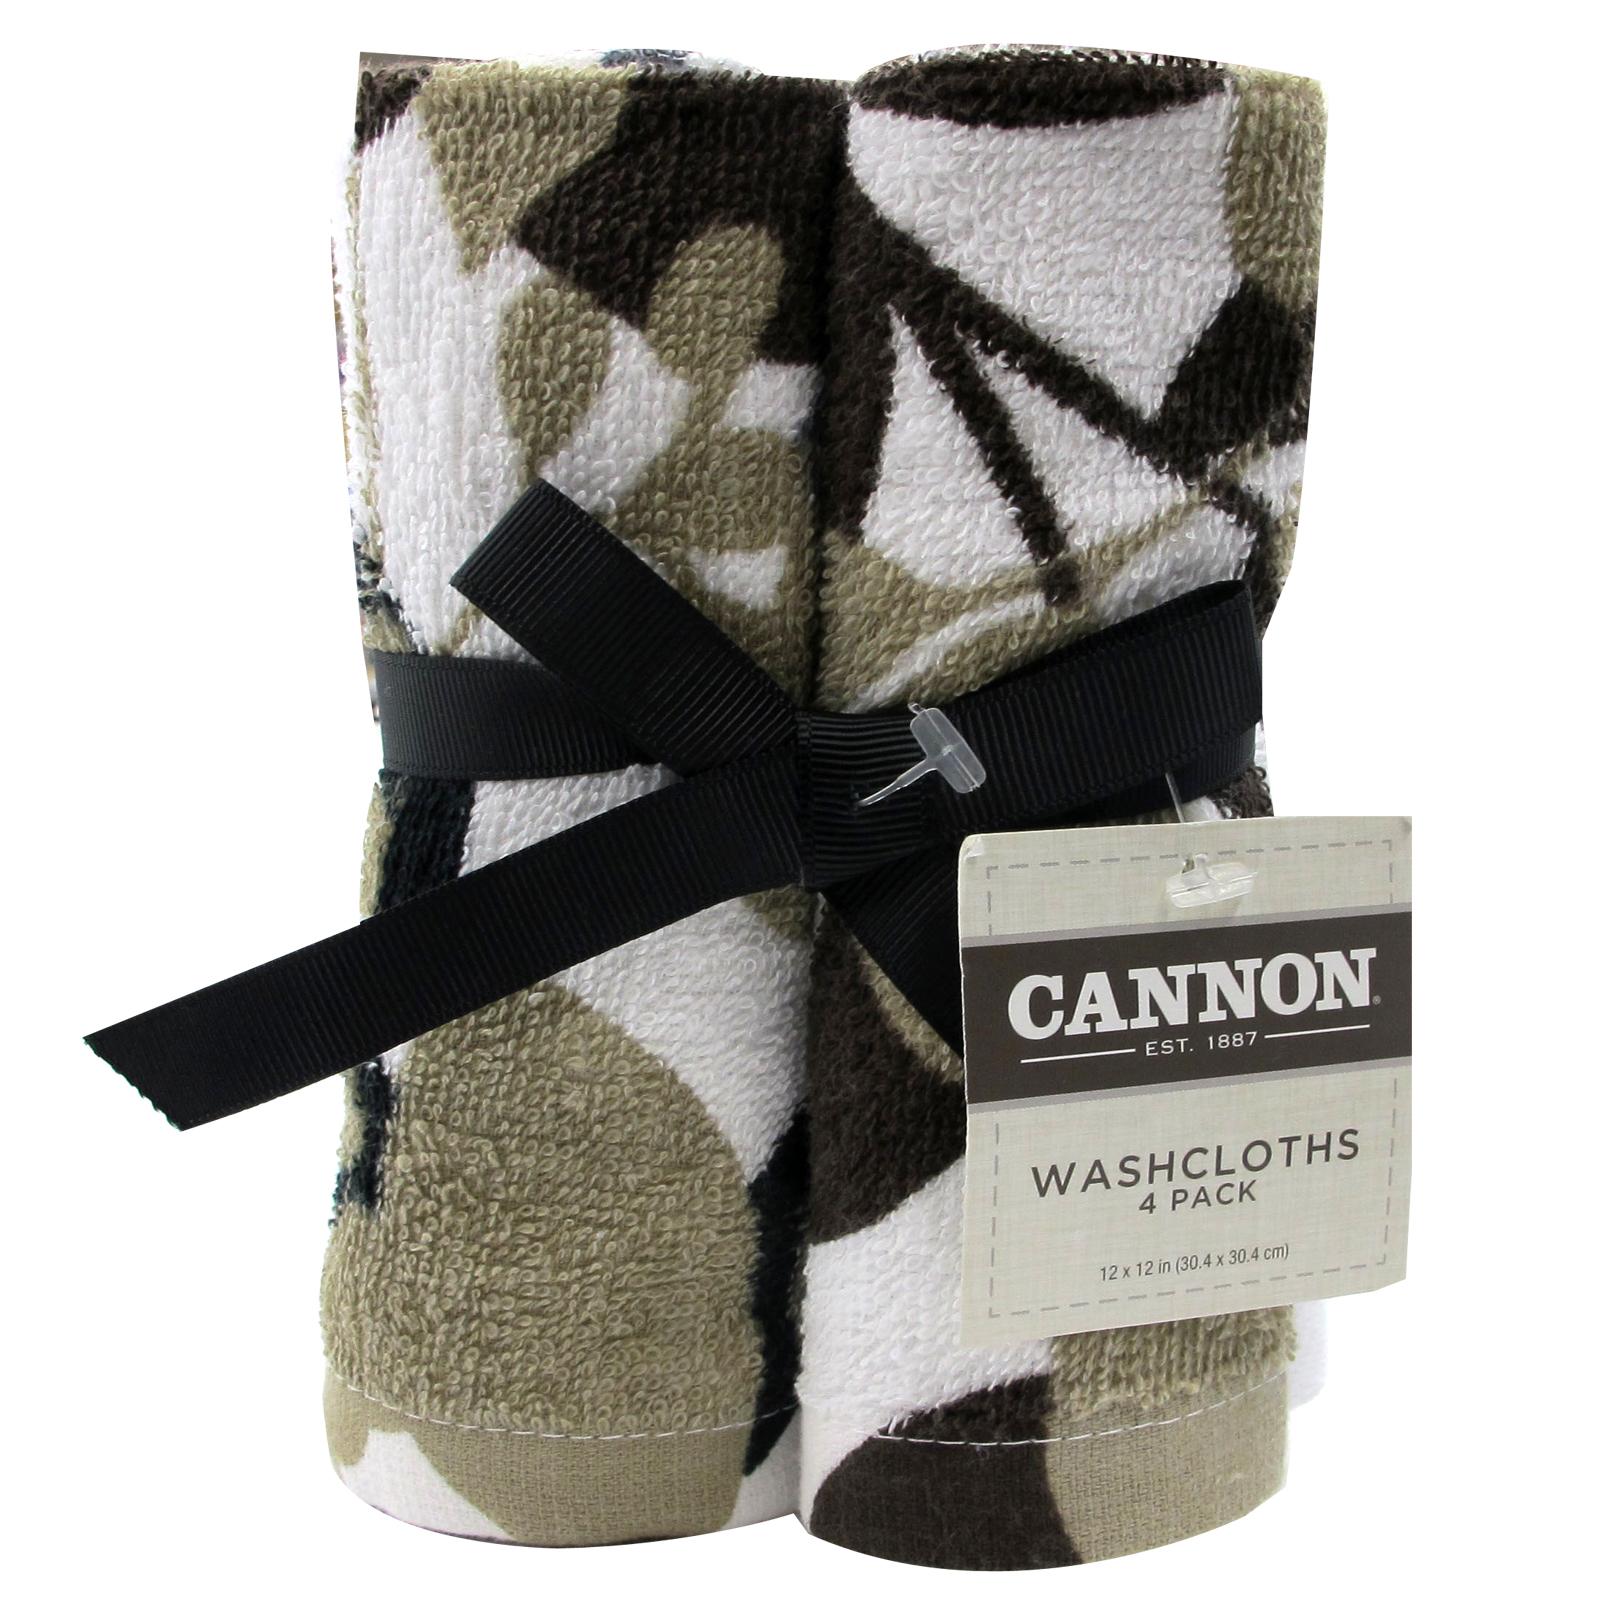 Cannon 4-Pack Washcloths - Leafing